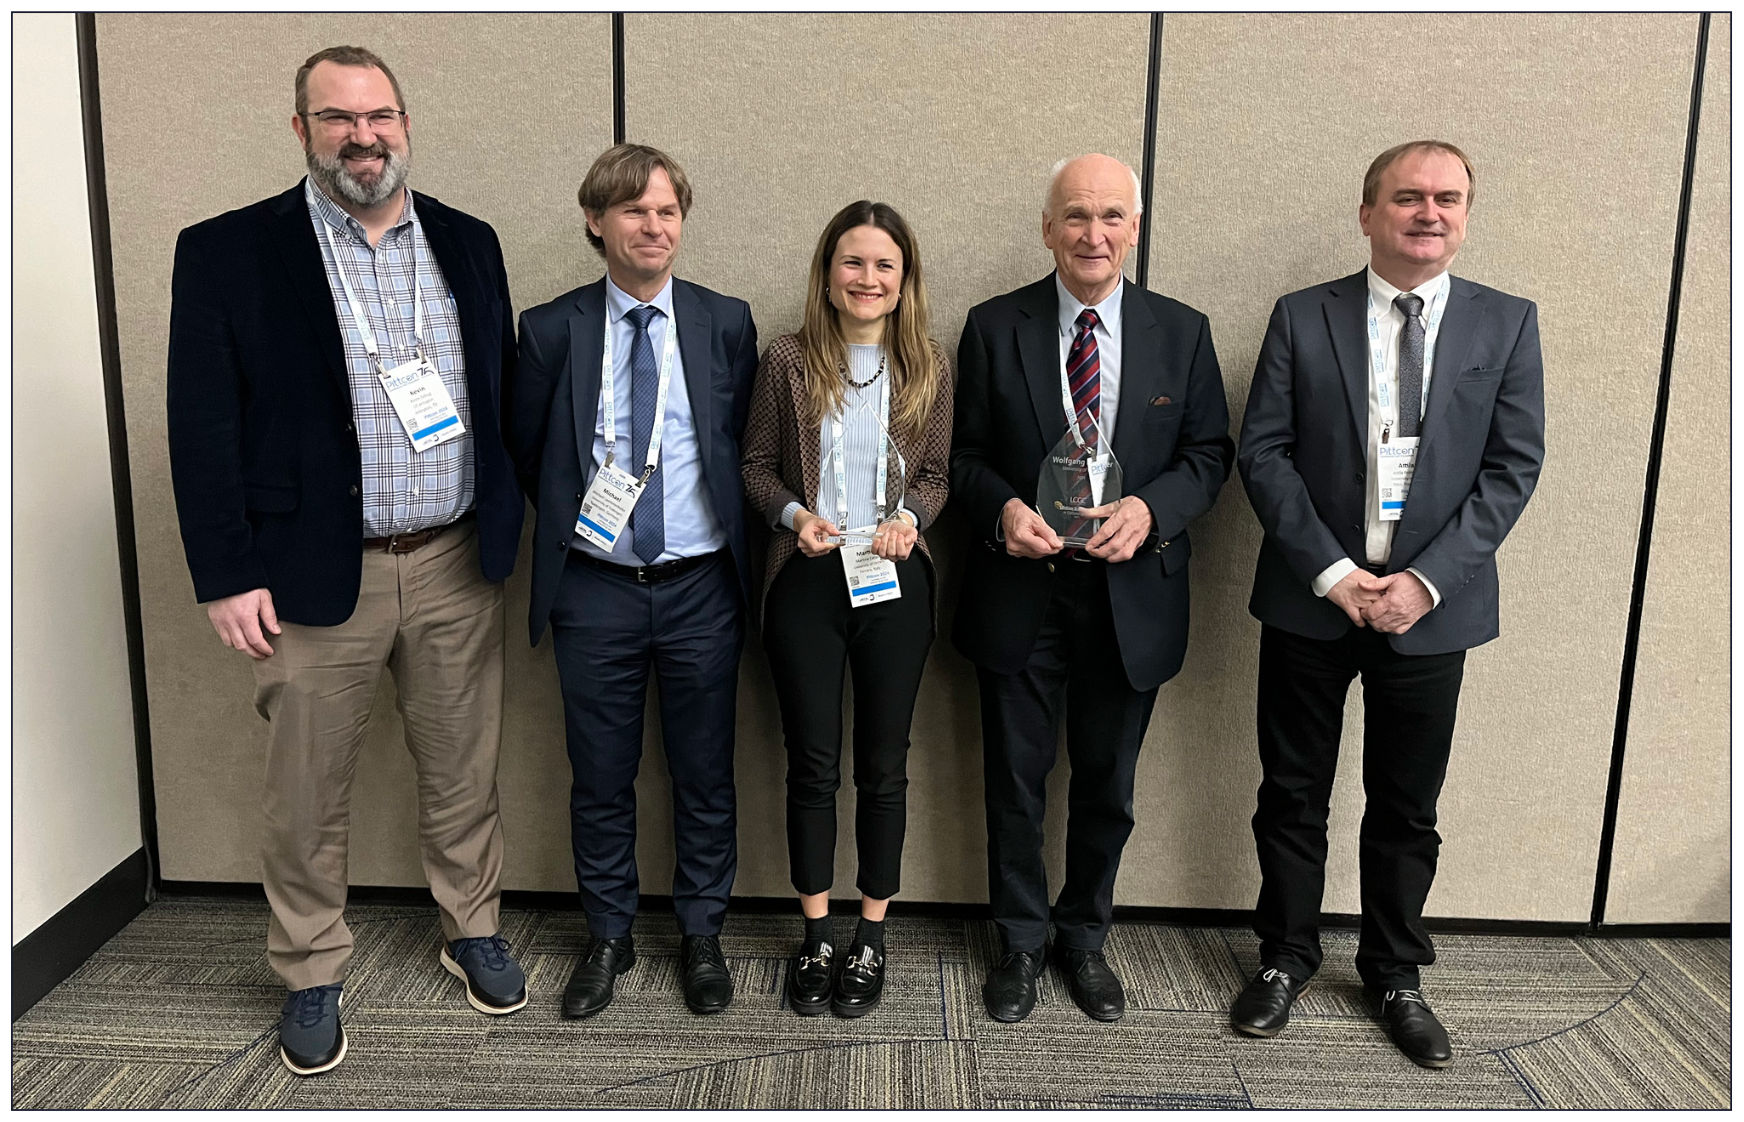 IMAGE 2: Wolfgang Lindner and Martina Catani pose for a photo with speakers from their award’s symposium at Pittcon 2024.